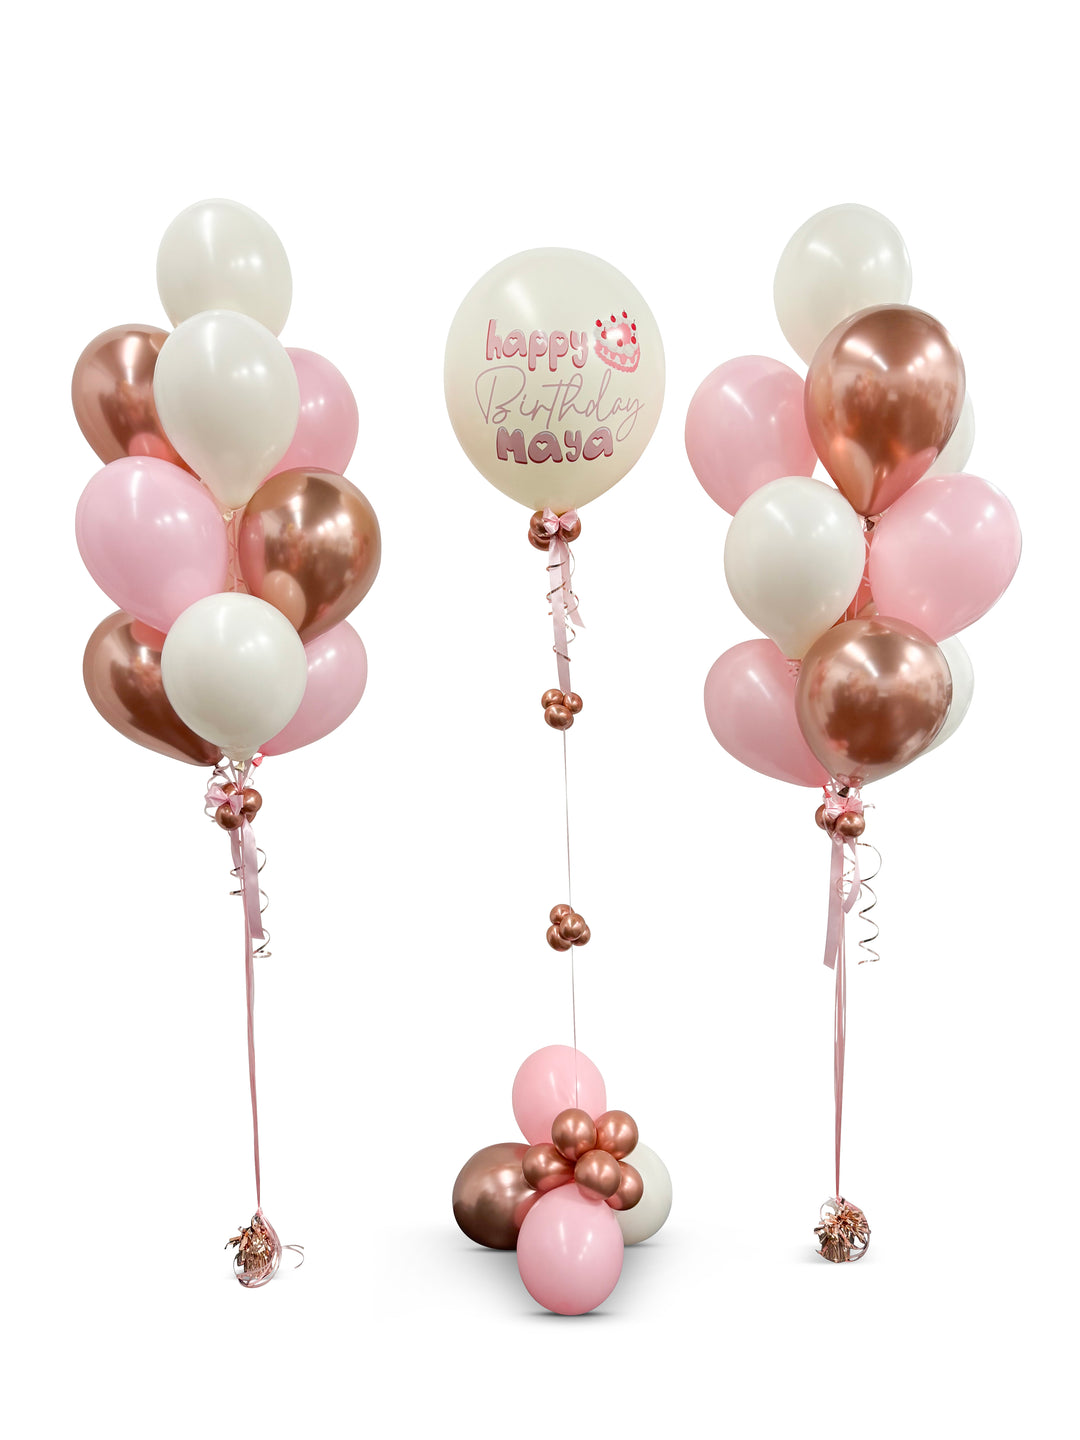 17" MESSAGE BALLOON CUSTOM (can be added to other products)